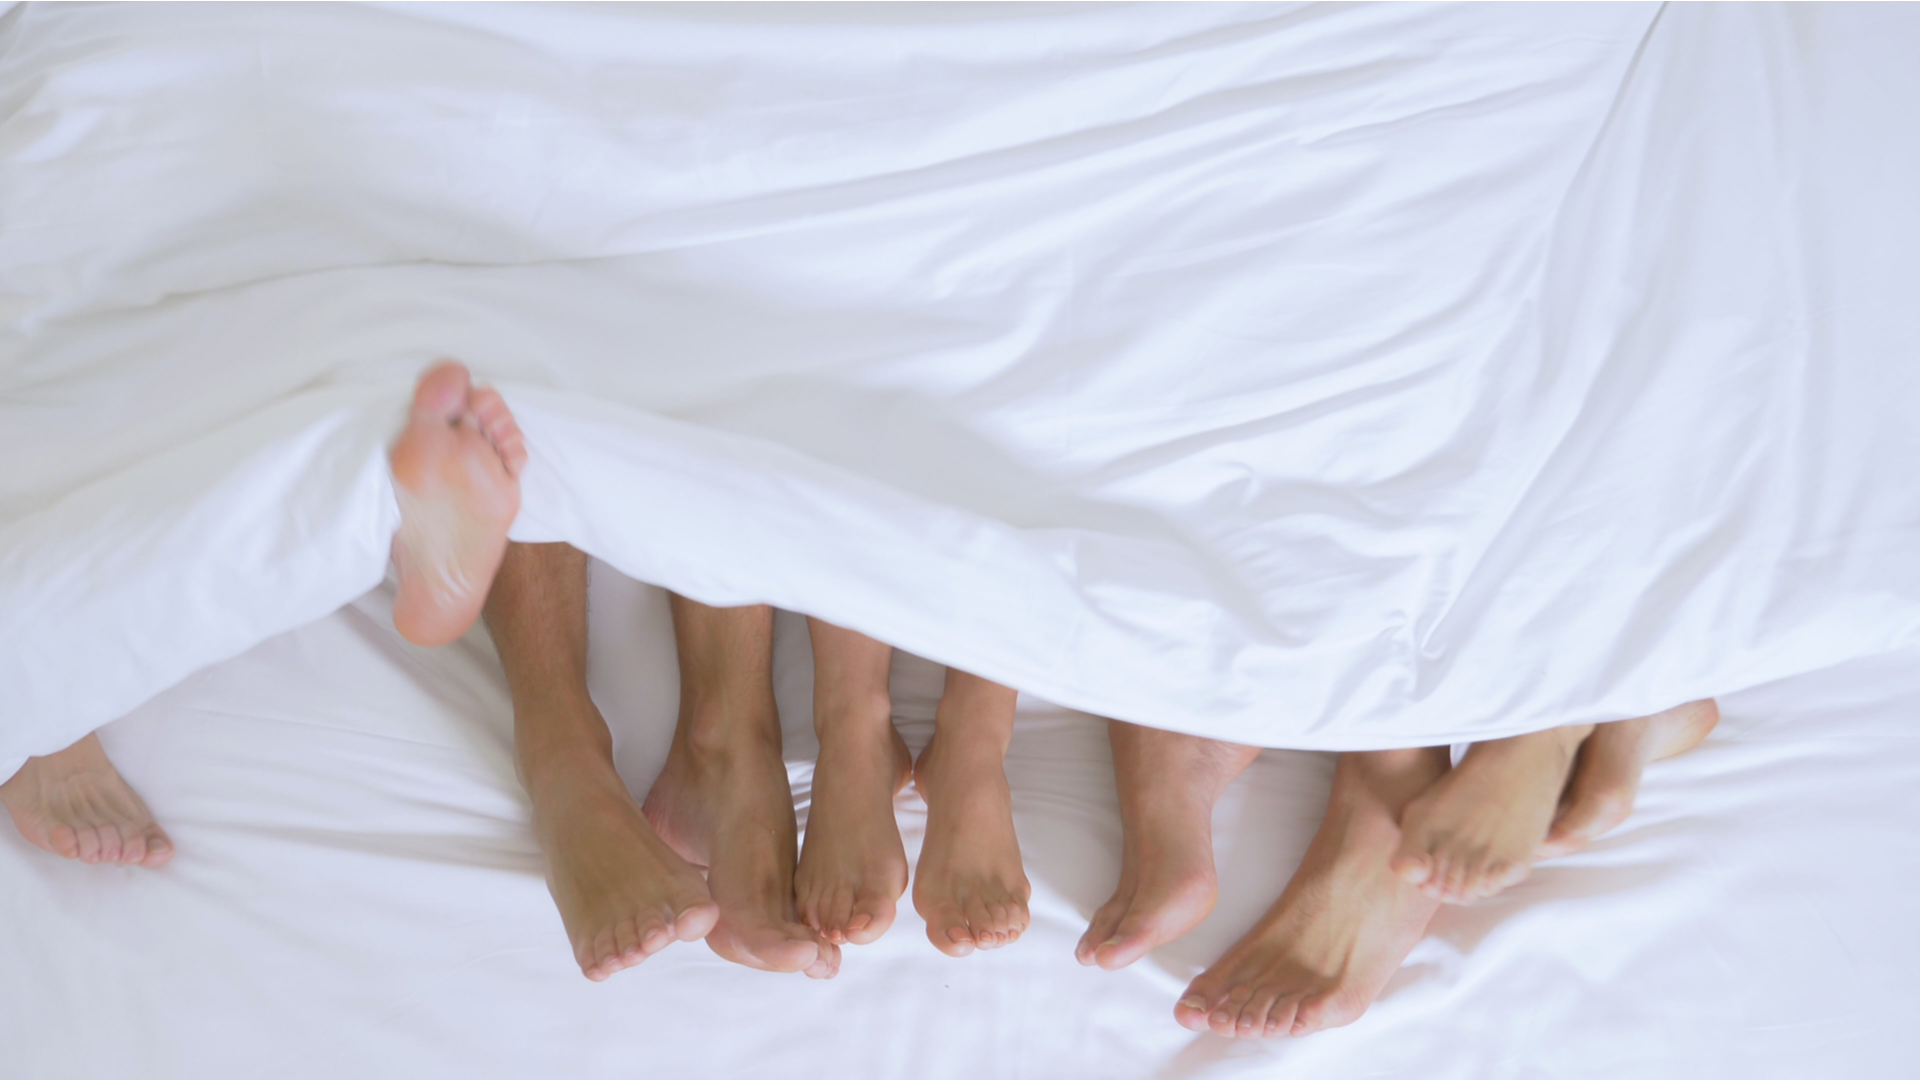 Feet of multiple people lying in the same bed, coming out of the bottom of a white duvet.